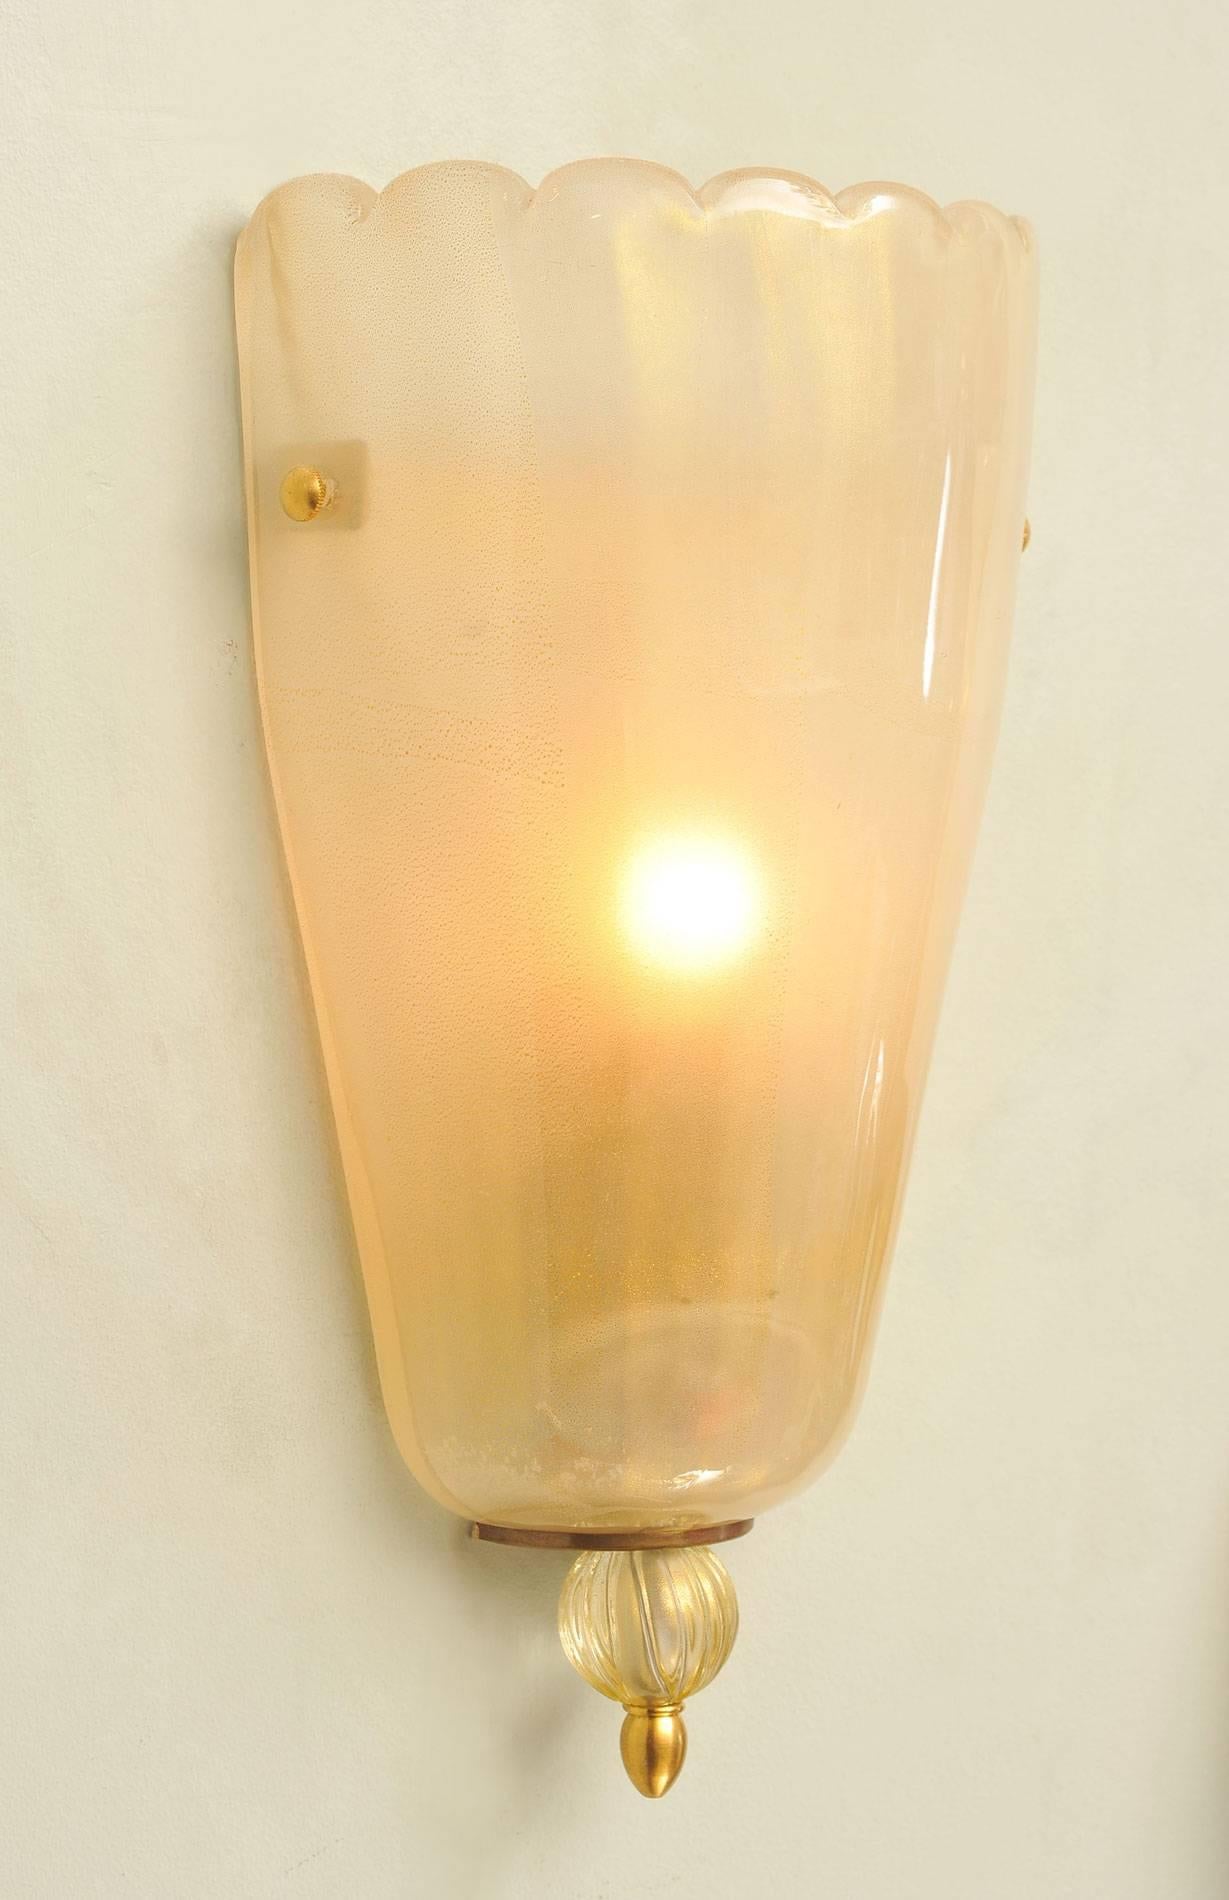 Cream aerated glass wall lights with gold flecks, softly fluted top and decorative ball finial at the base.